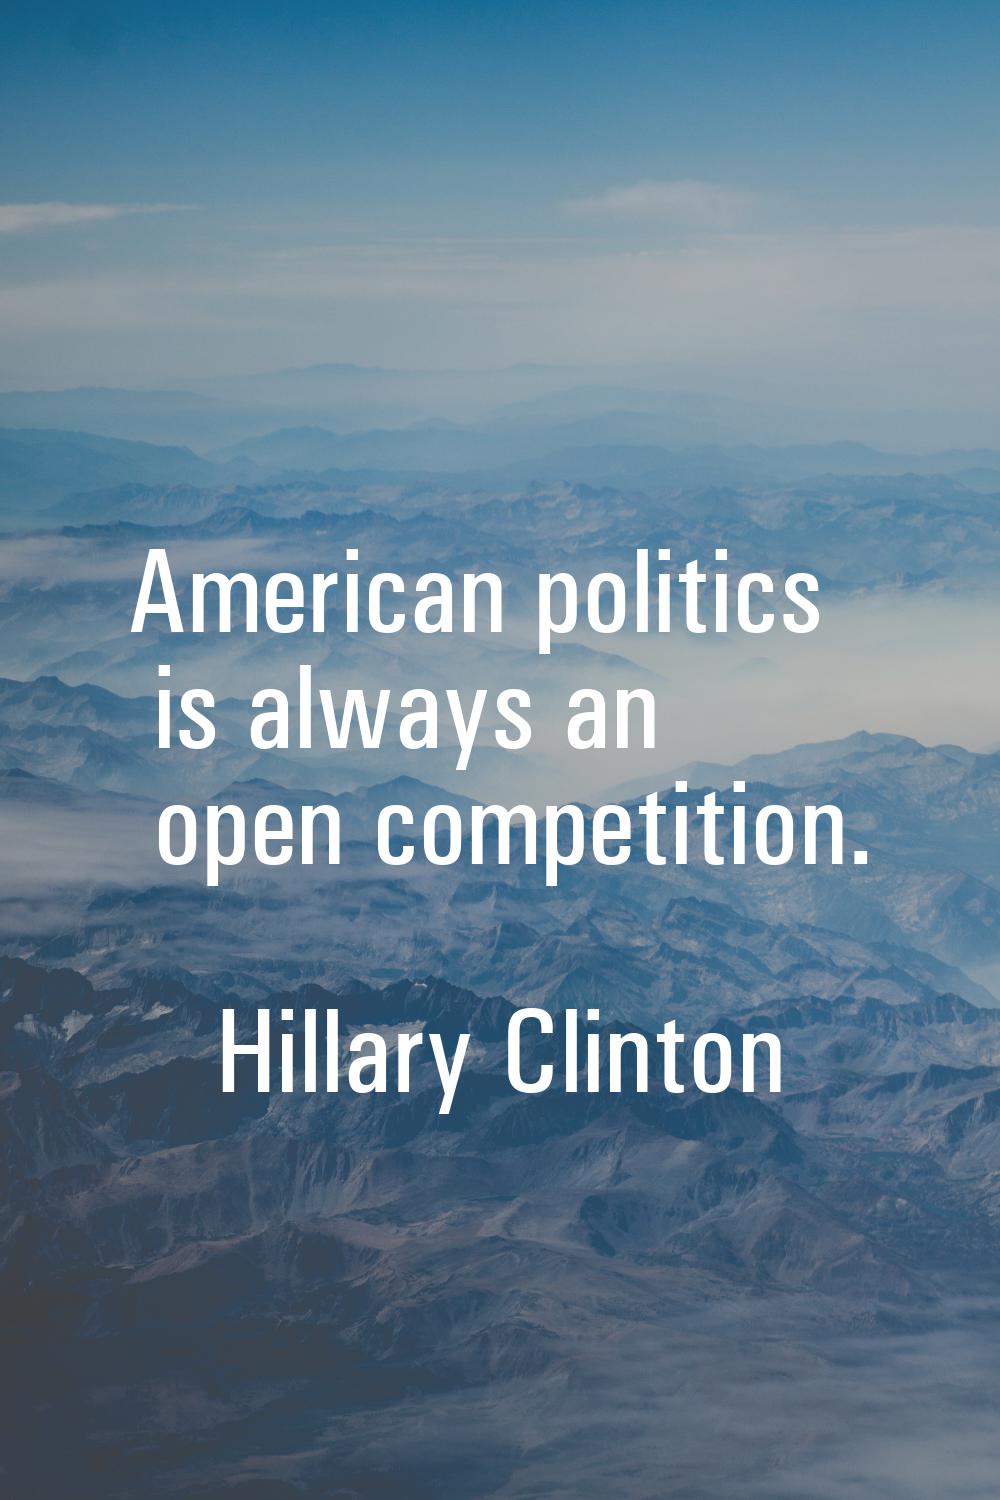 American politics is always an open competition.